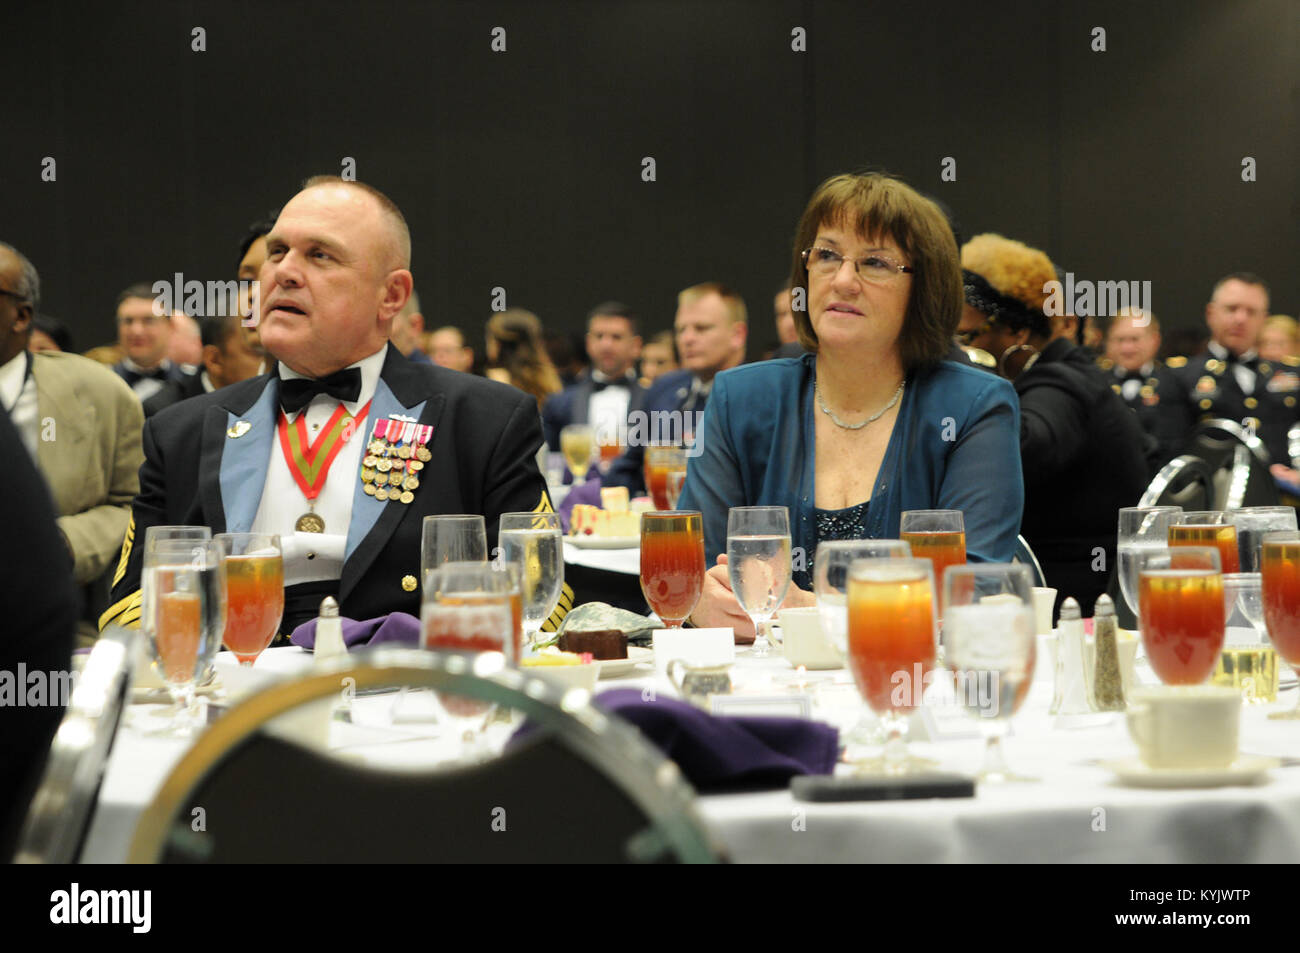 The Kentucky National Guard hosted the 2015 Outstanding Airman and Soldier of the Year Banquet March 14, 2015 at the Kentucky Fair and Exposition Center in Louisville, Kentucky. The annual awards dinner honors Kentucky's finest Airmen and Soldiers who are recognized by their peers for dedicating themselves to the welfare and security of our nation. Stock Photo